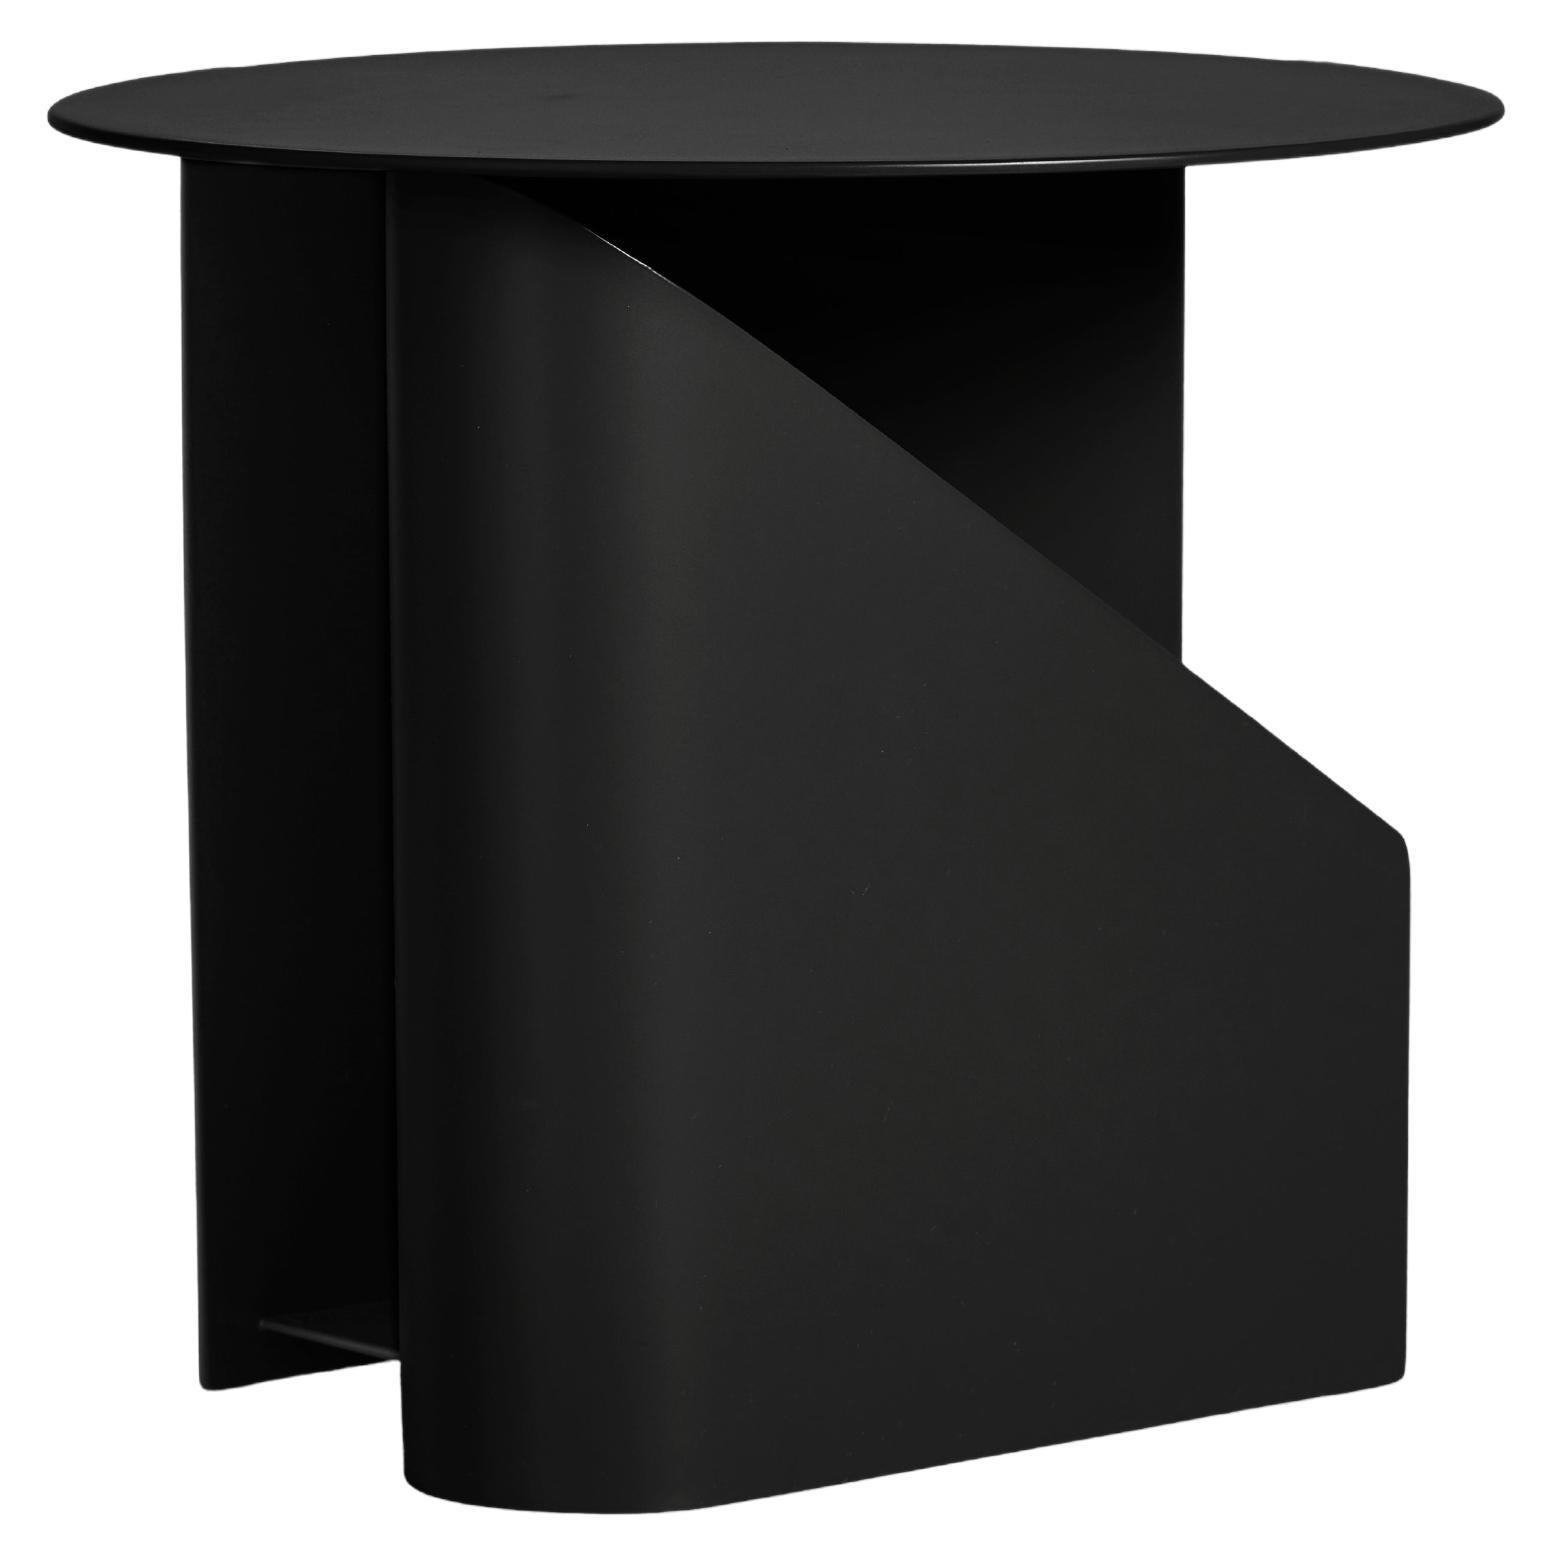 Sentrum Side Table by Schmahl + Schnippering